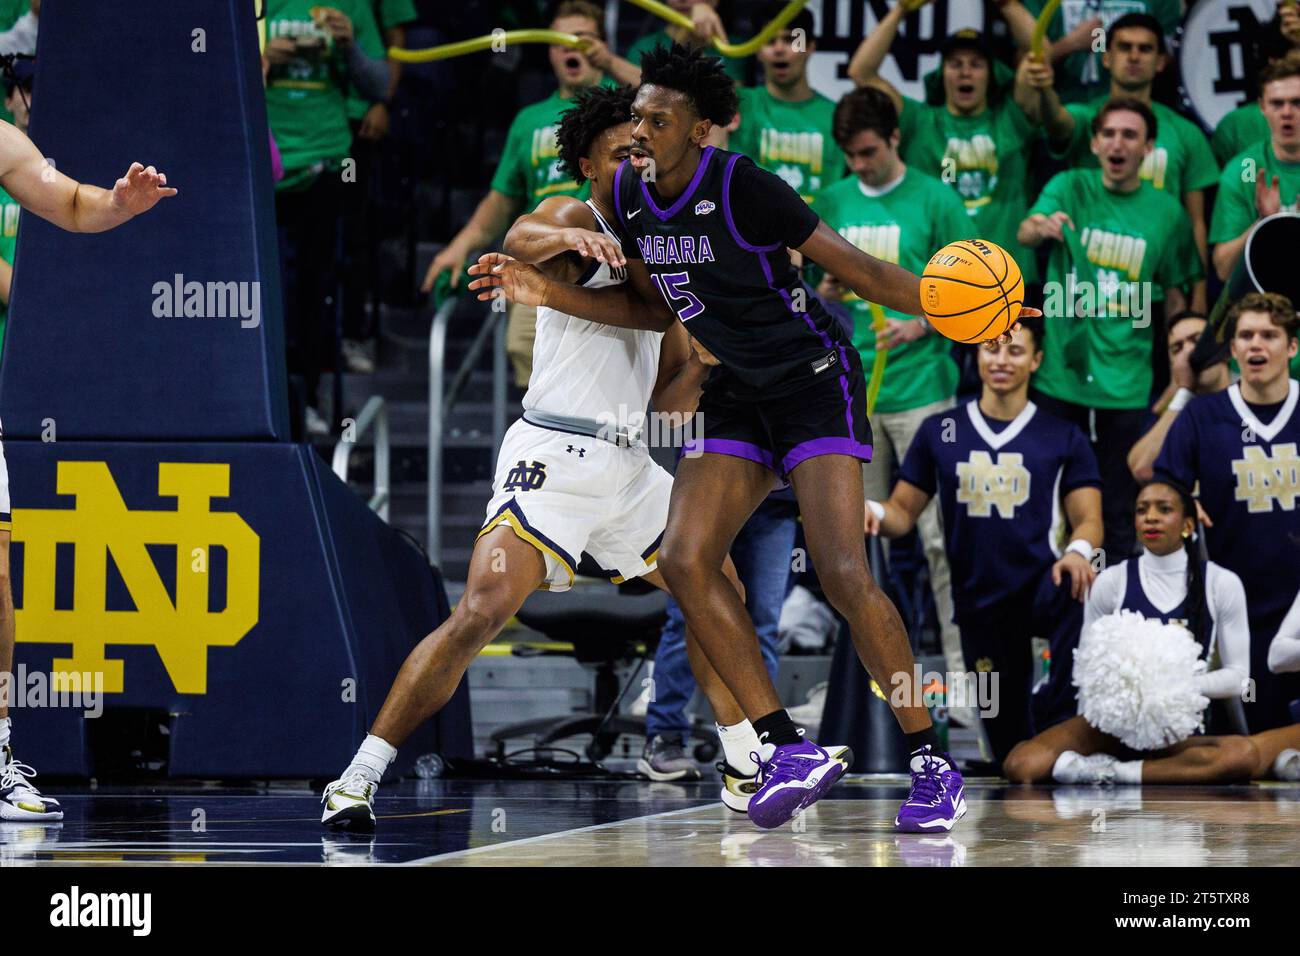 South Bend, Indiana, USA. 06th Nov, 2023. Niagara Forward Yaw Obeng-Mensah (15) pivots to the basket as Notre Dame guard Julian Roper II (1) defends during NCAA basketball game action between the Niagara Purple Eagles and the Notre Dame Fighting Irish at Purcell Pavilion at the Joyce Center in South Bend, Indiana. Notre Dame defeated Niagara 70-63. John Mersits/CSM/Alamy Live News Stock Photo